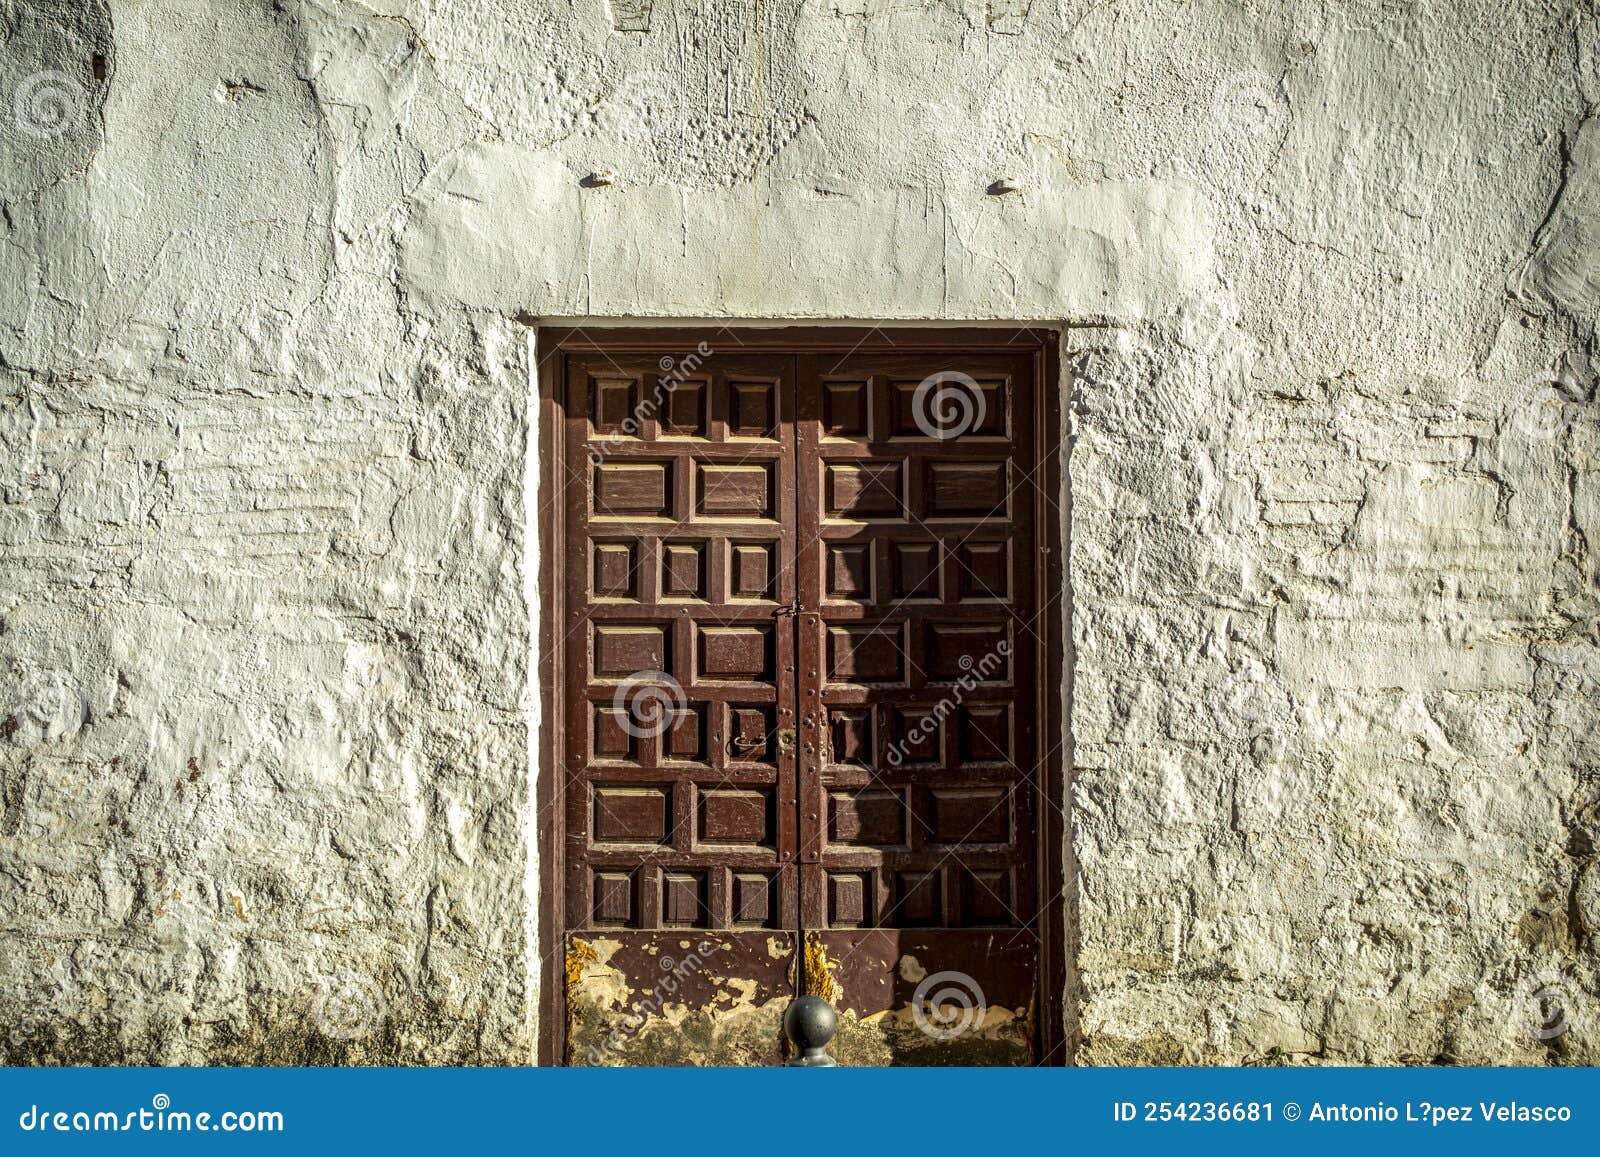 old and worn maroon double wooden door with a lock on a whitewashed wall very textured